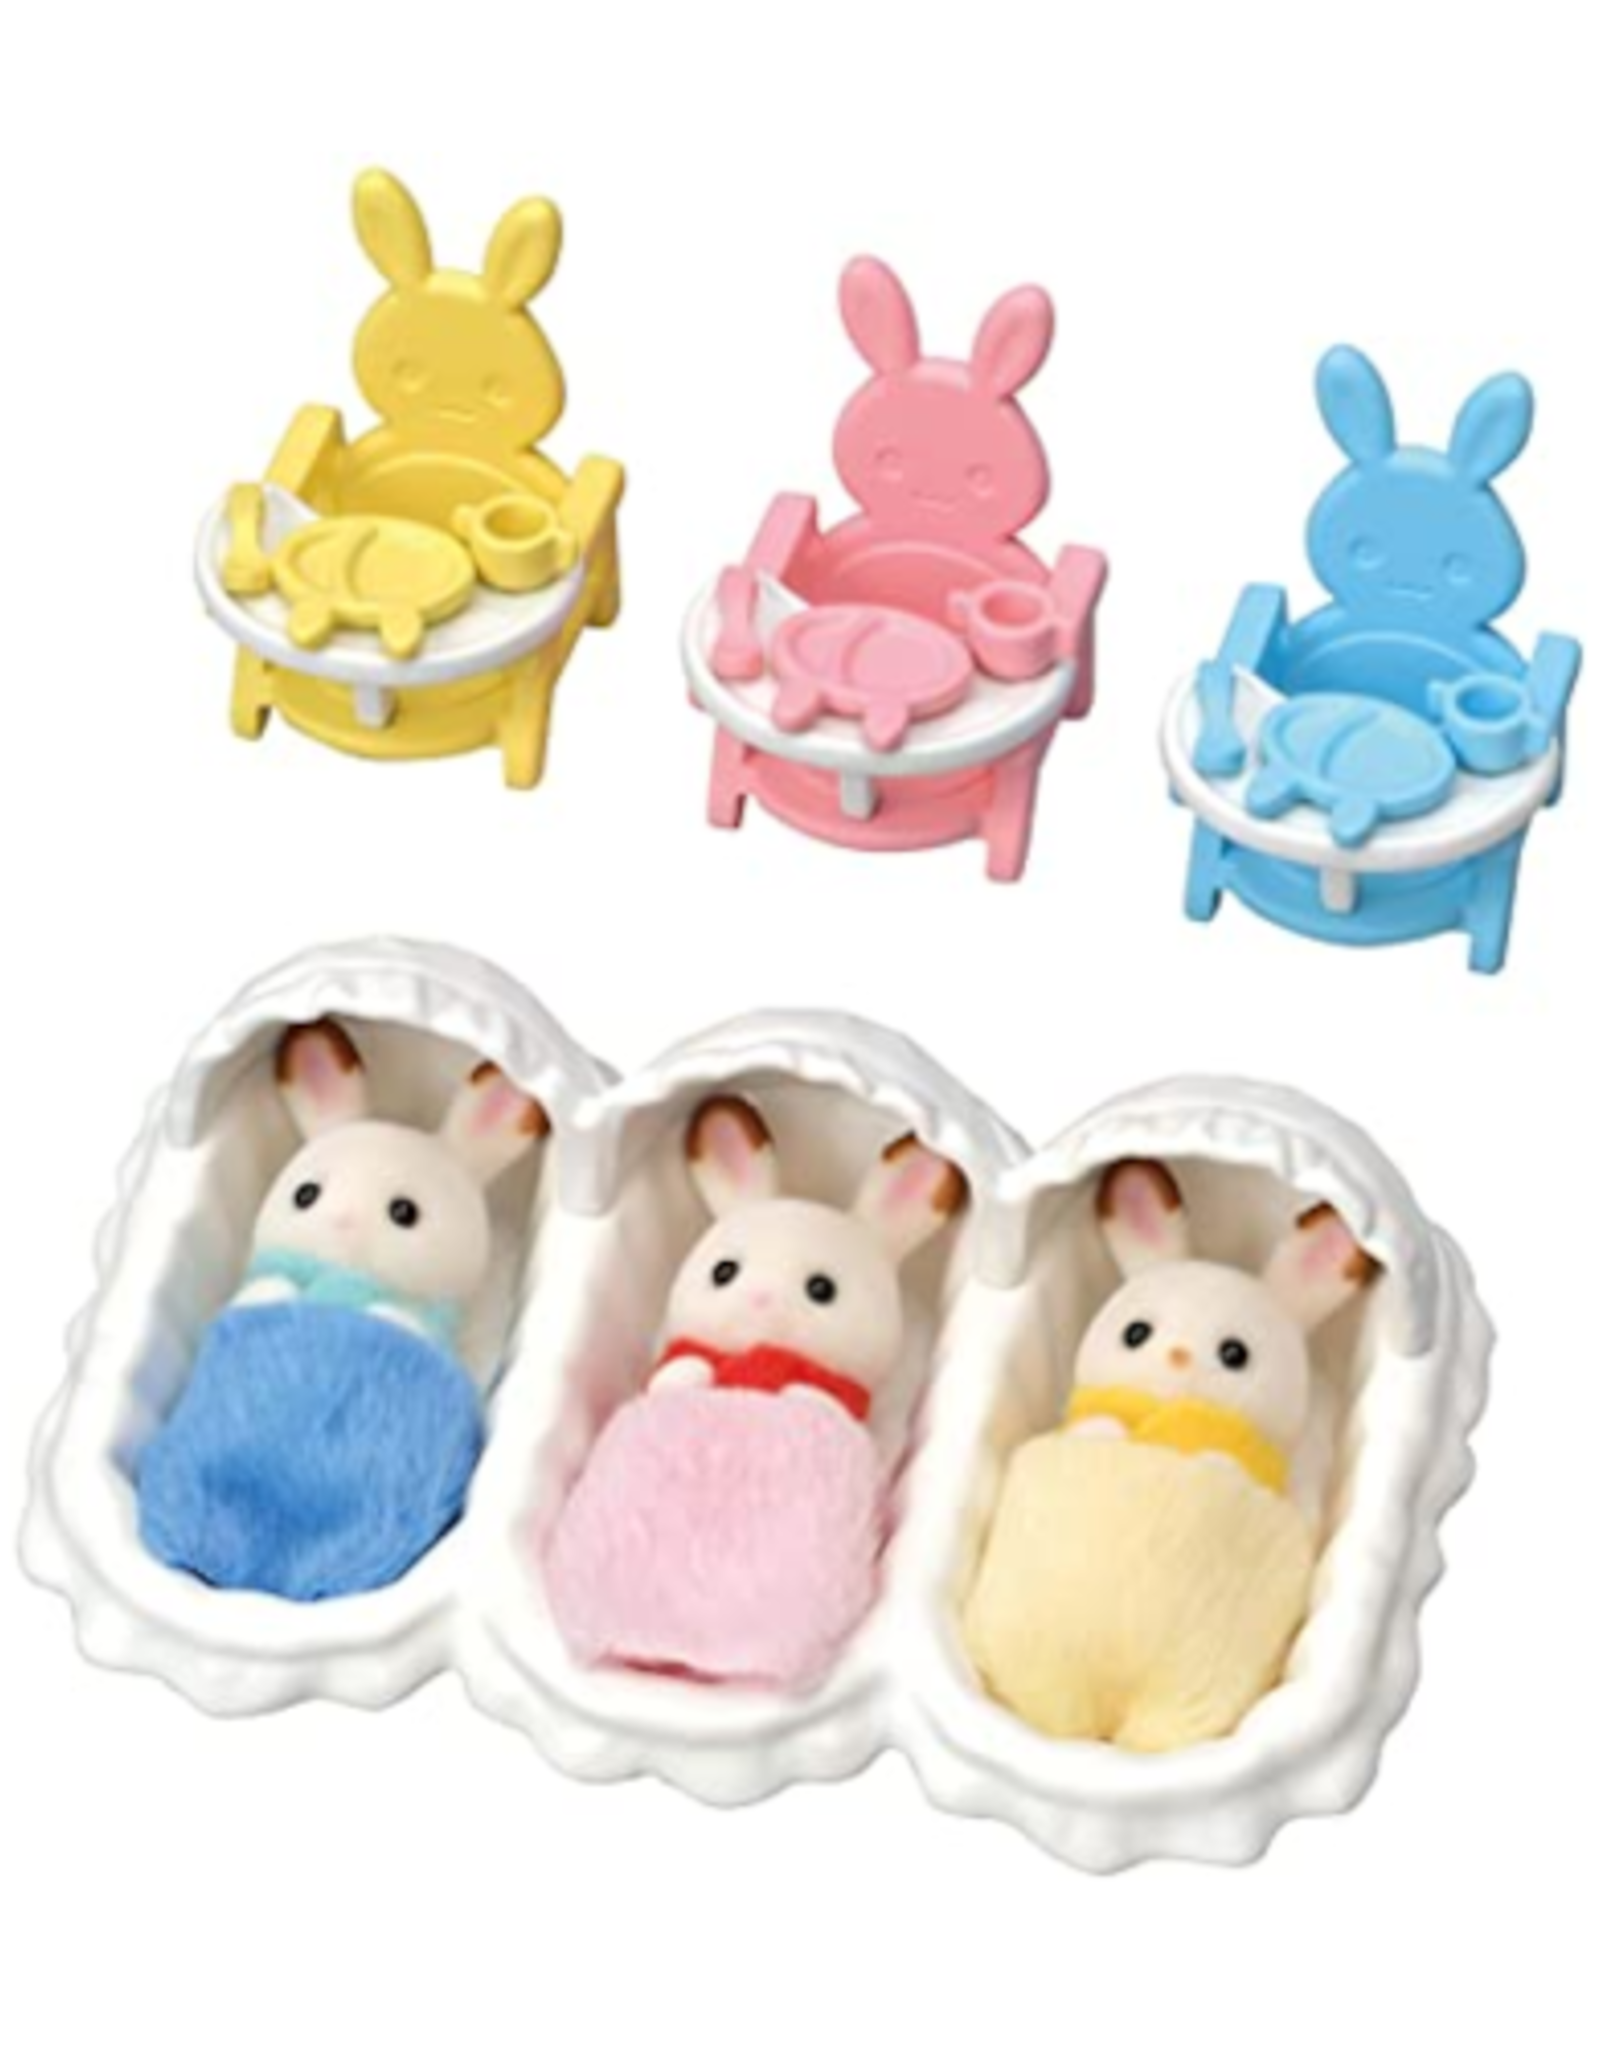 Calico Critters Calico Critters - Triplet Care Set